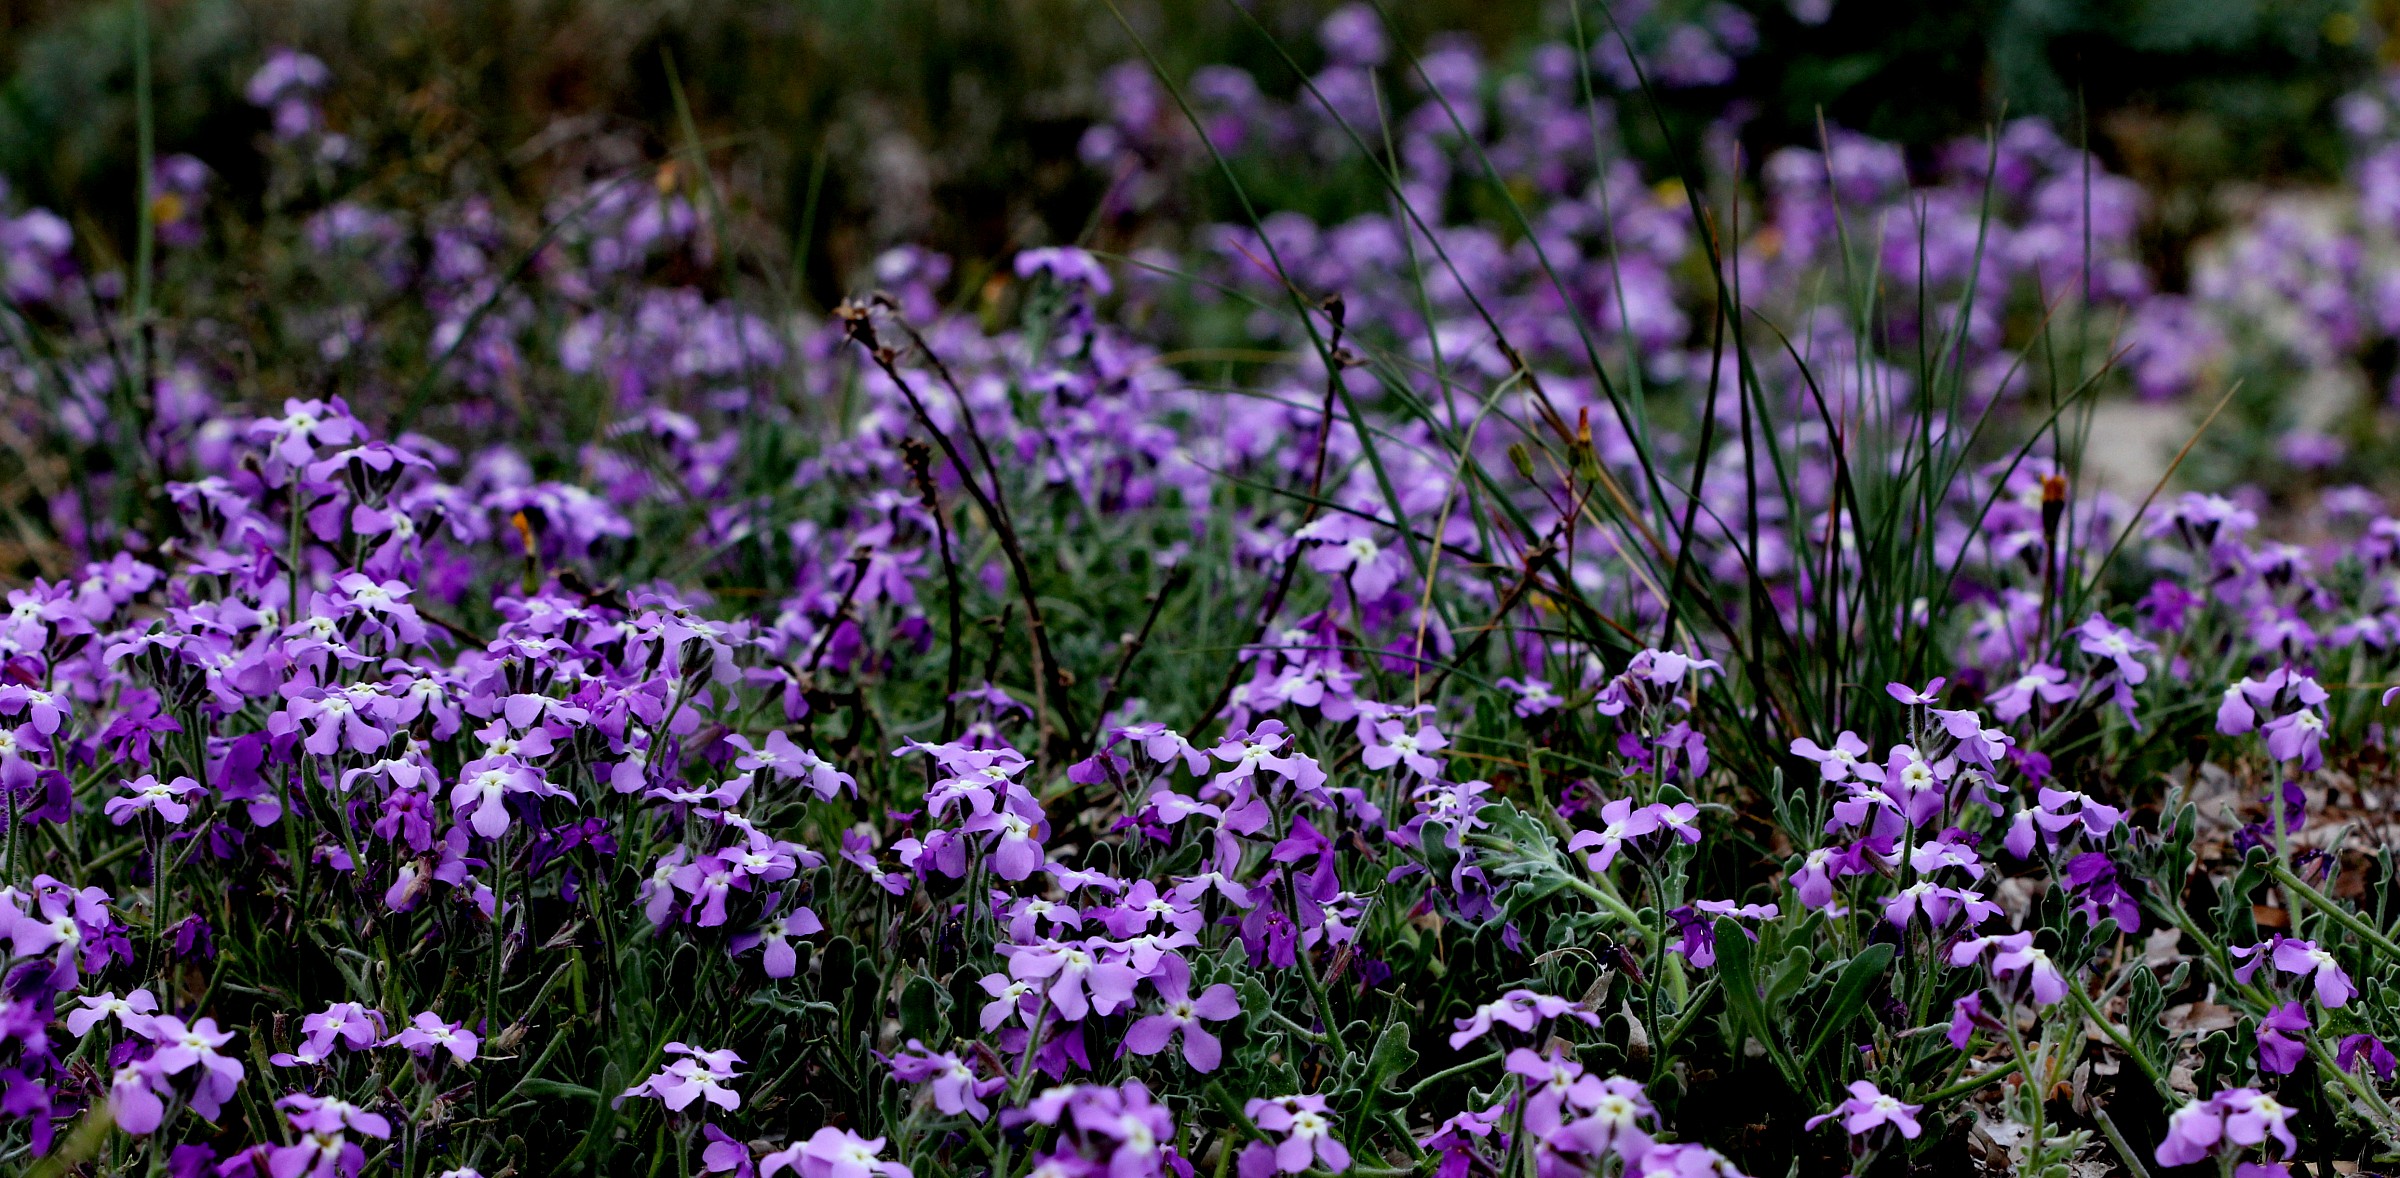 Spring in the sand is colored purple...